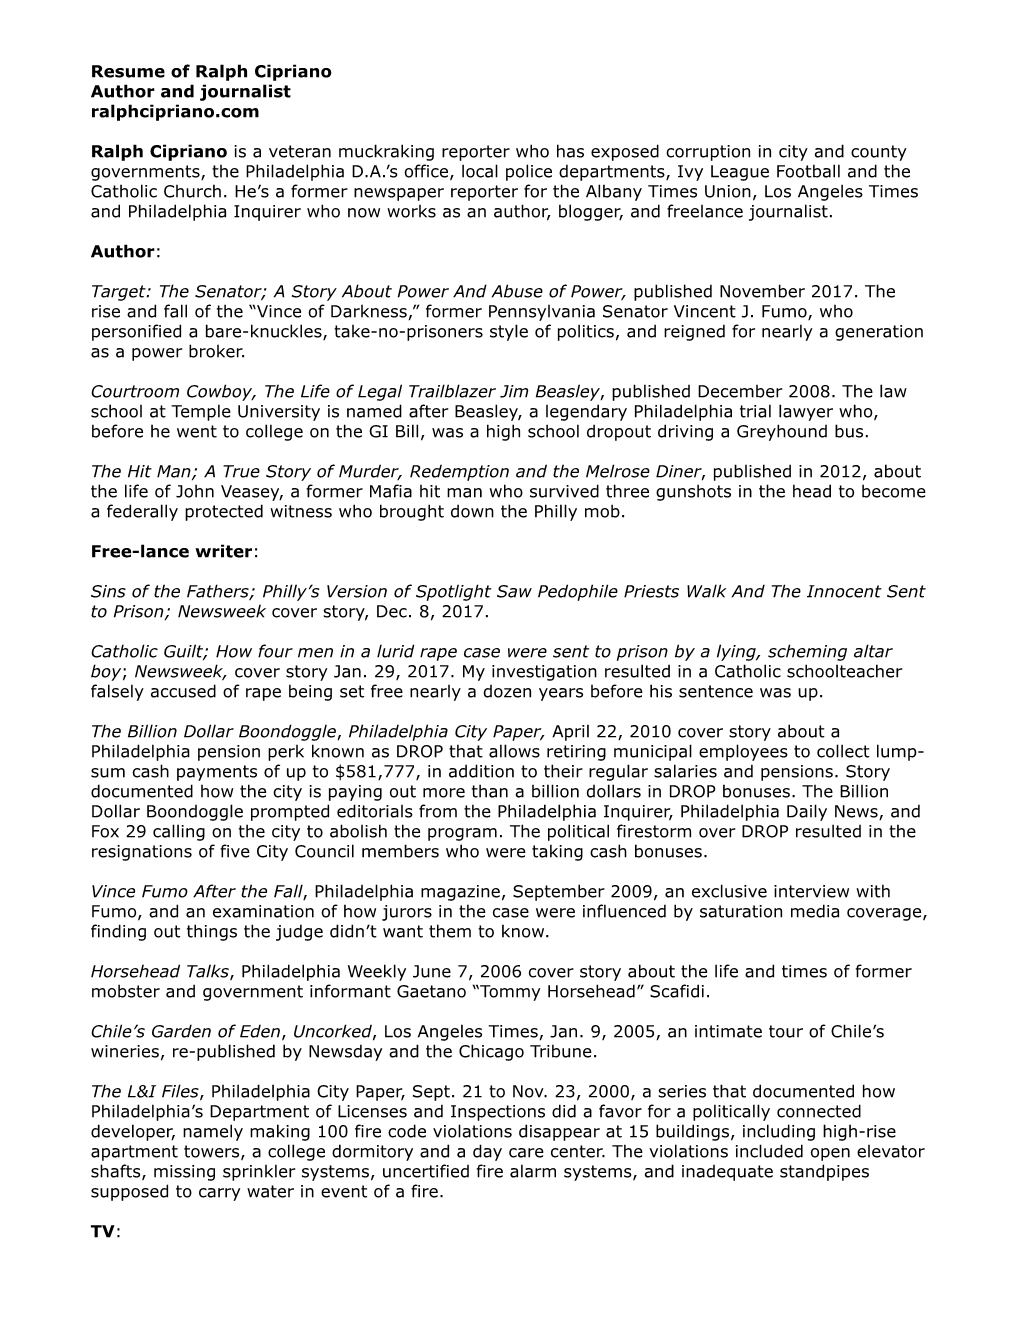 Resume of Ralph Cipriano Author and Journalist Ralphcipriano.Com